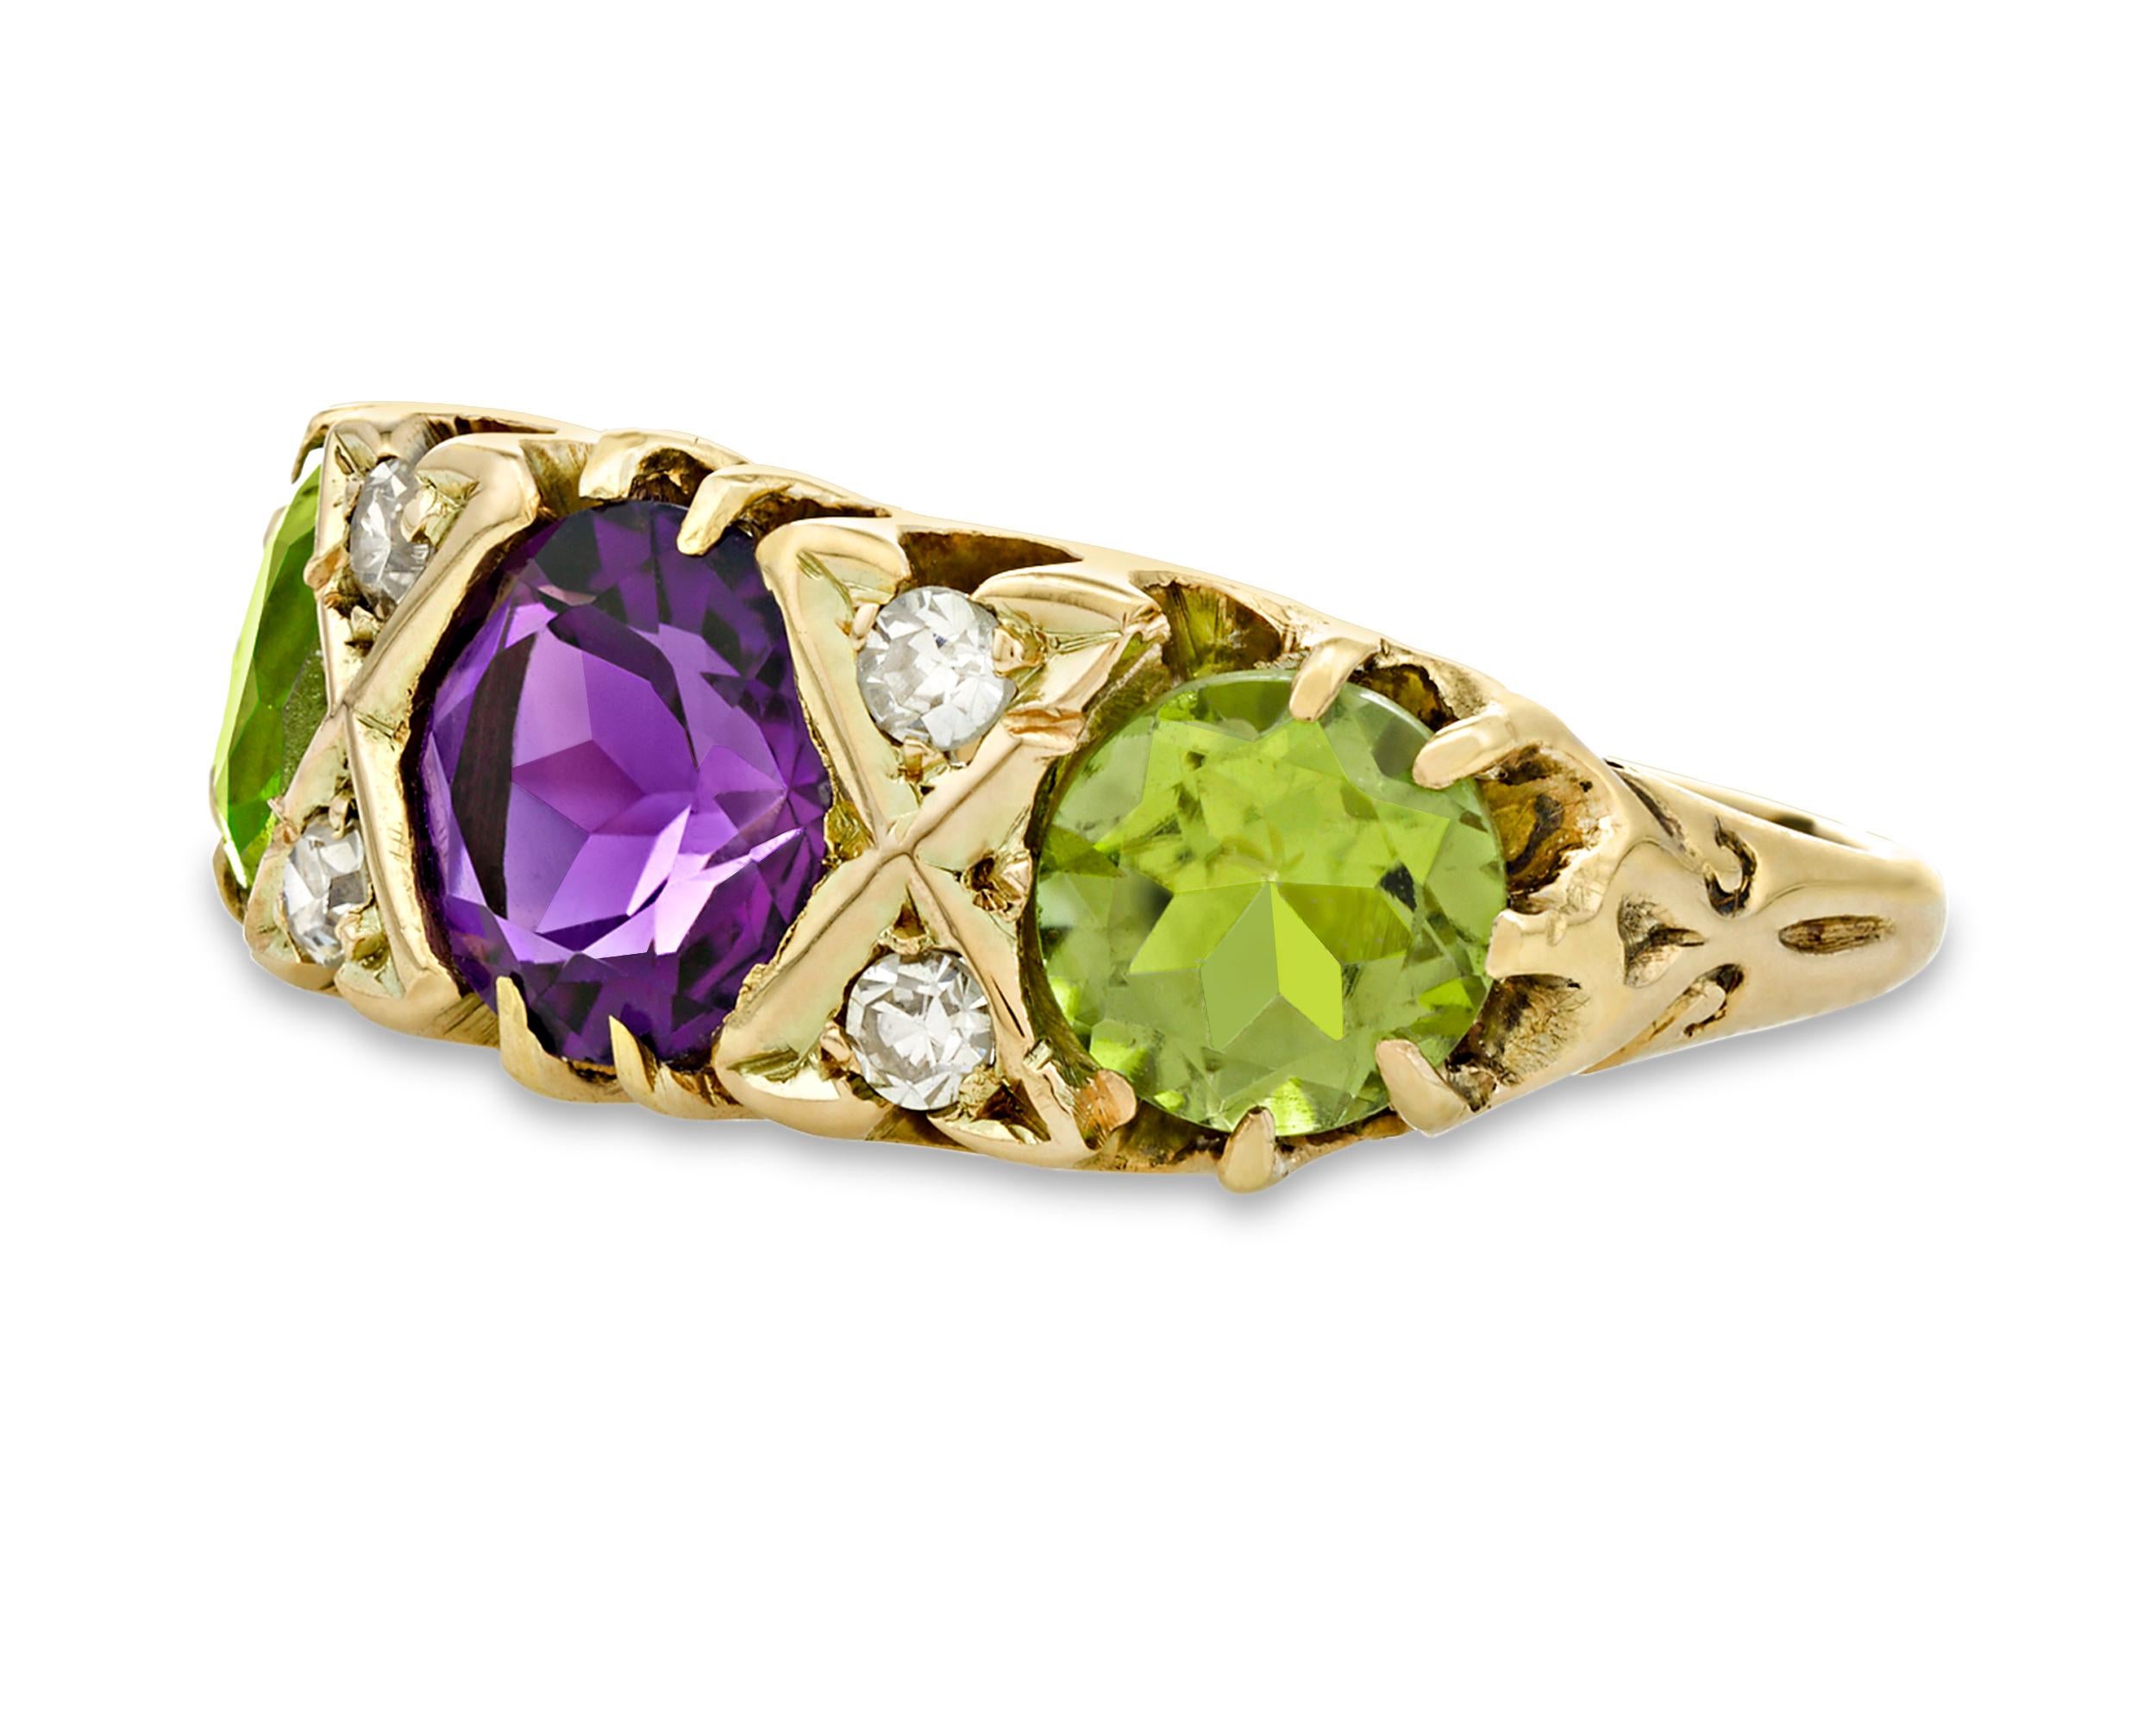 Remarkable historical significance distinguishes this Victorian Suffragette ring. This exquisite work of jeweled art was worn by a British Suffragette to show her support for the movement. The official colors of the women's suffrage movement were